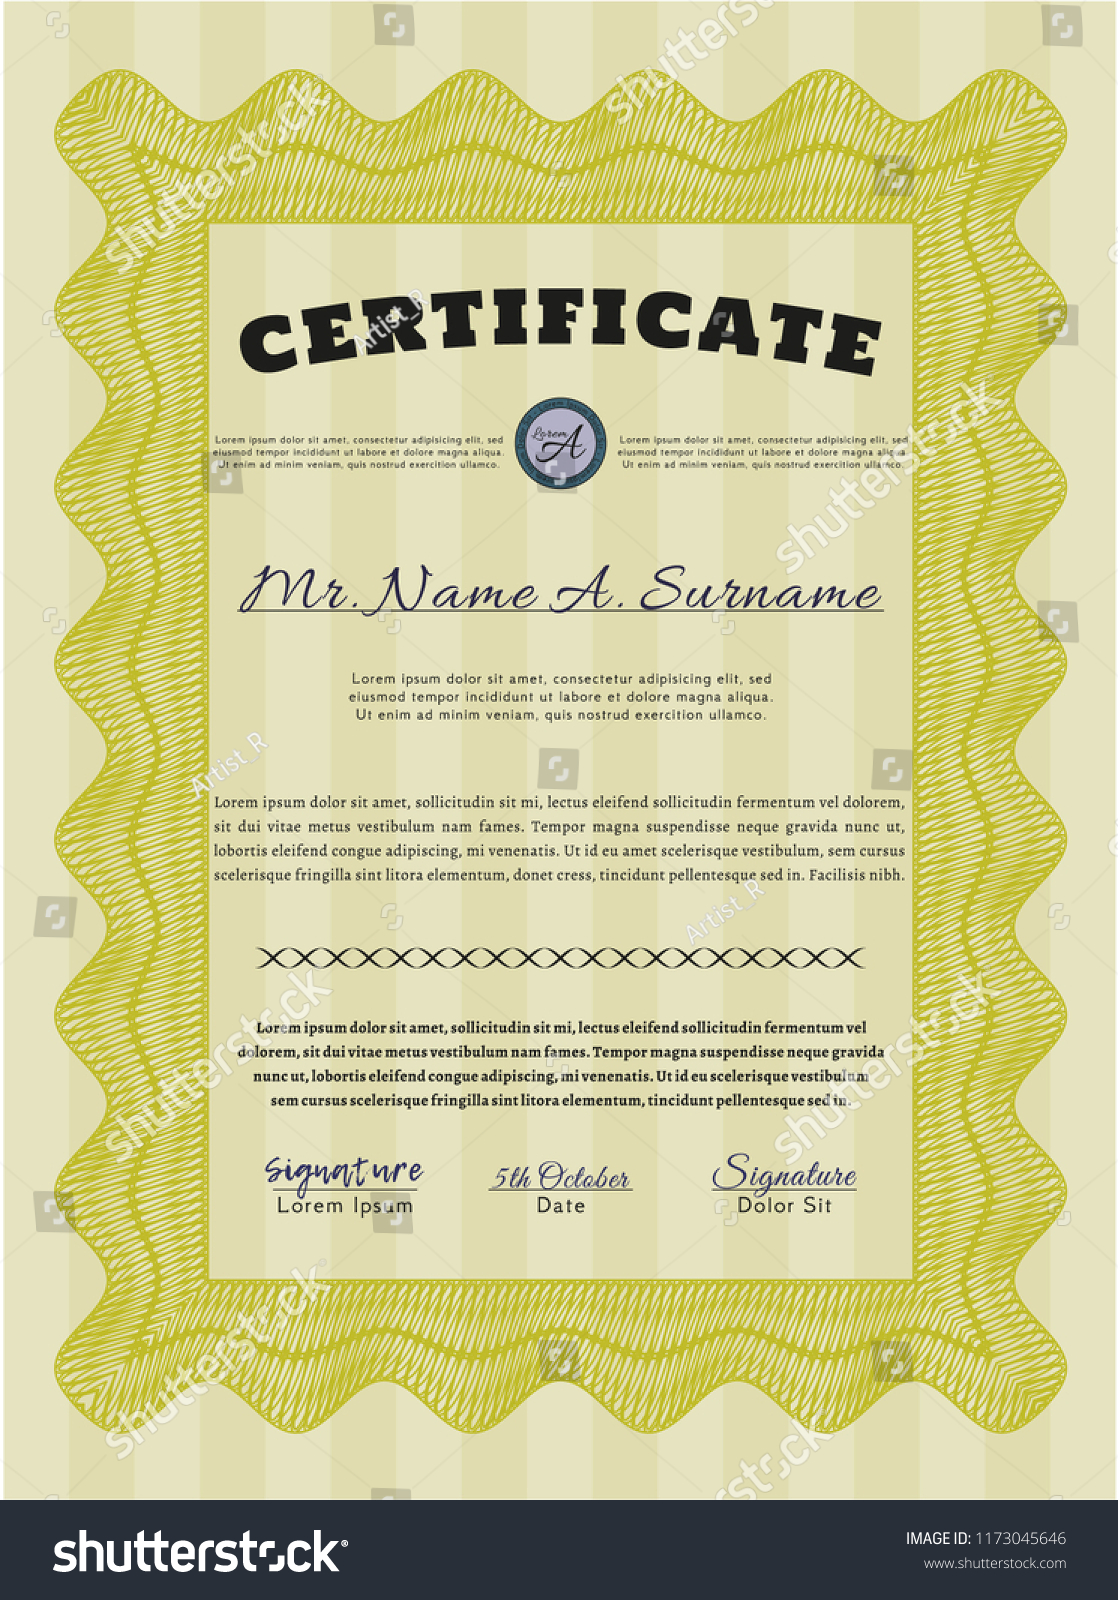 Yellow Certificate or diploma template. Modern design. Vector illustration. With linear background.  #1173045646